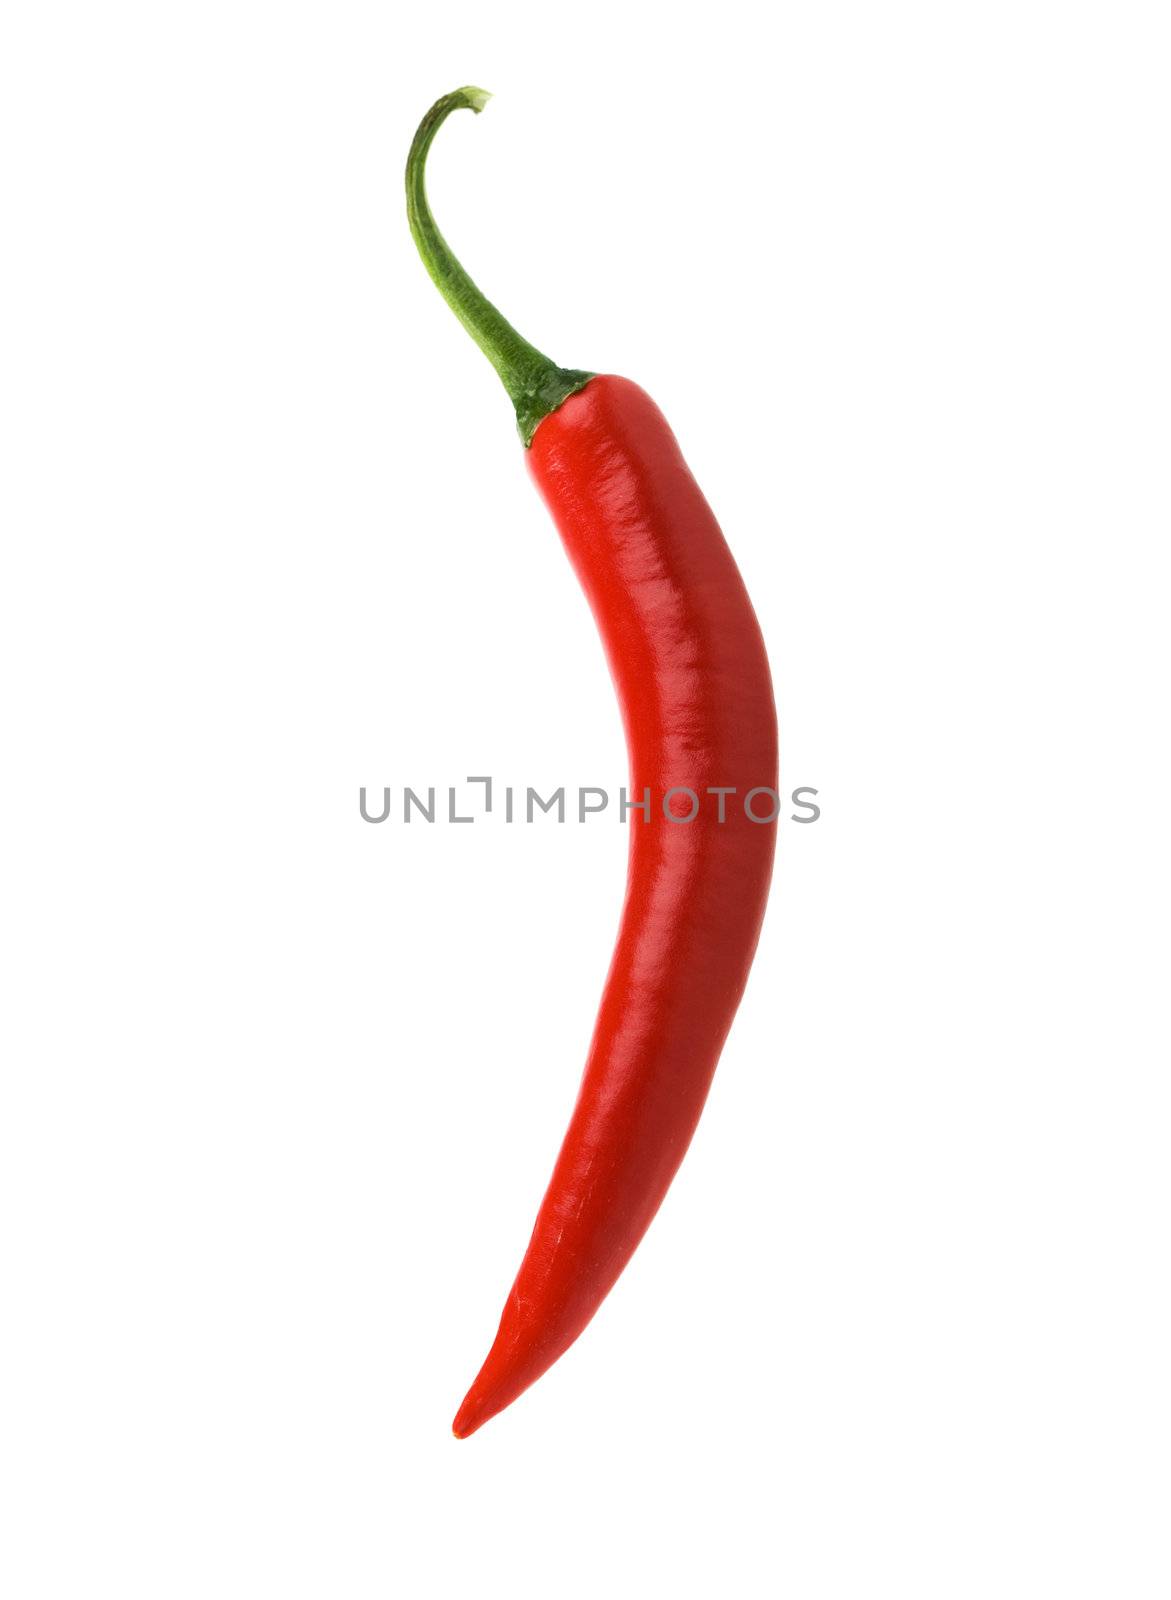 Isolated red chili pepper by stevemc